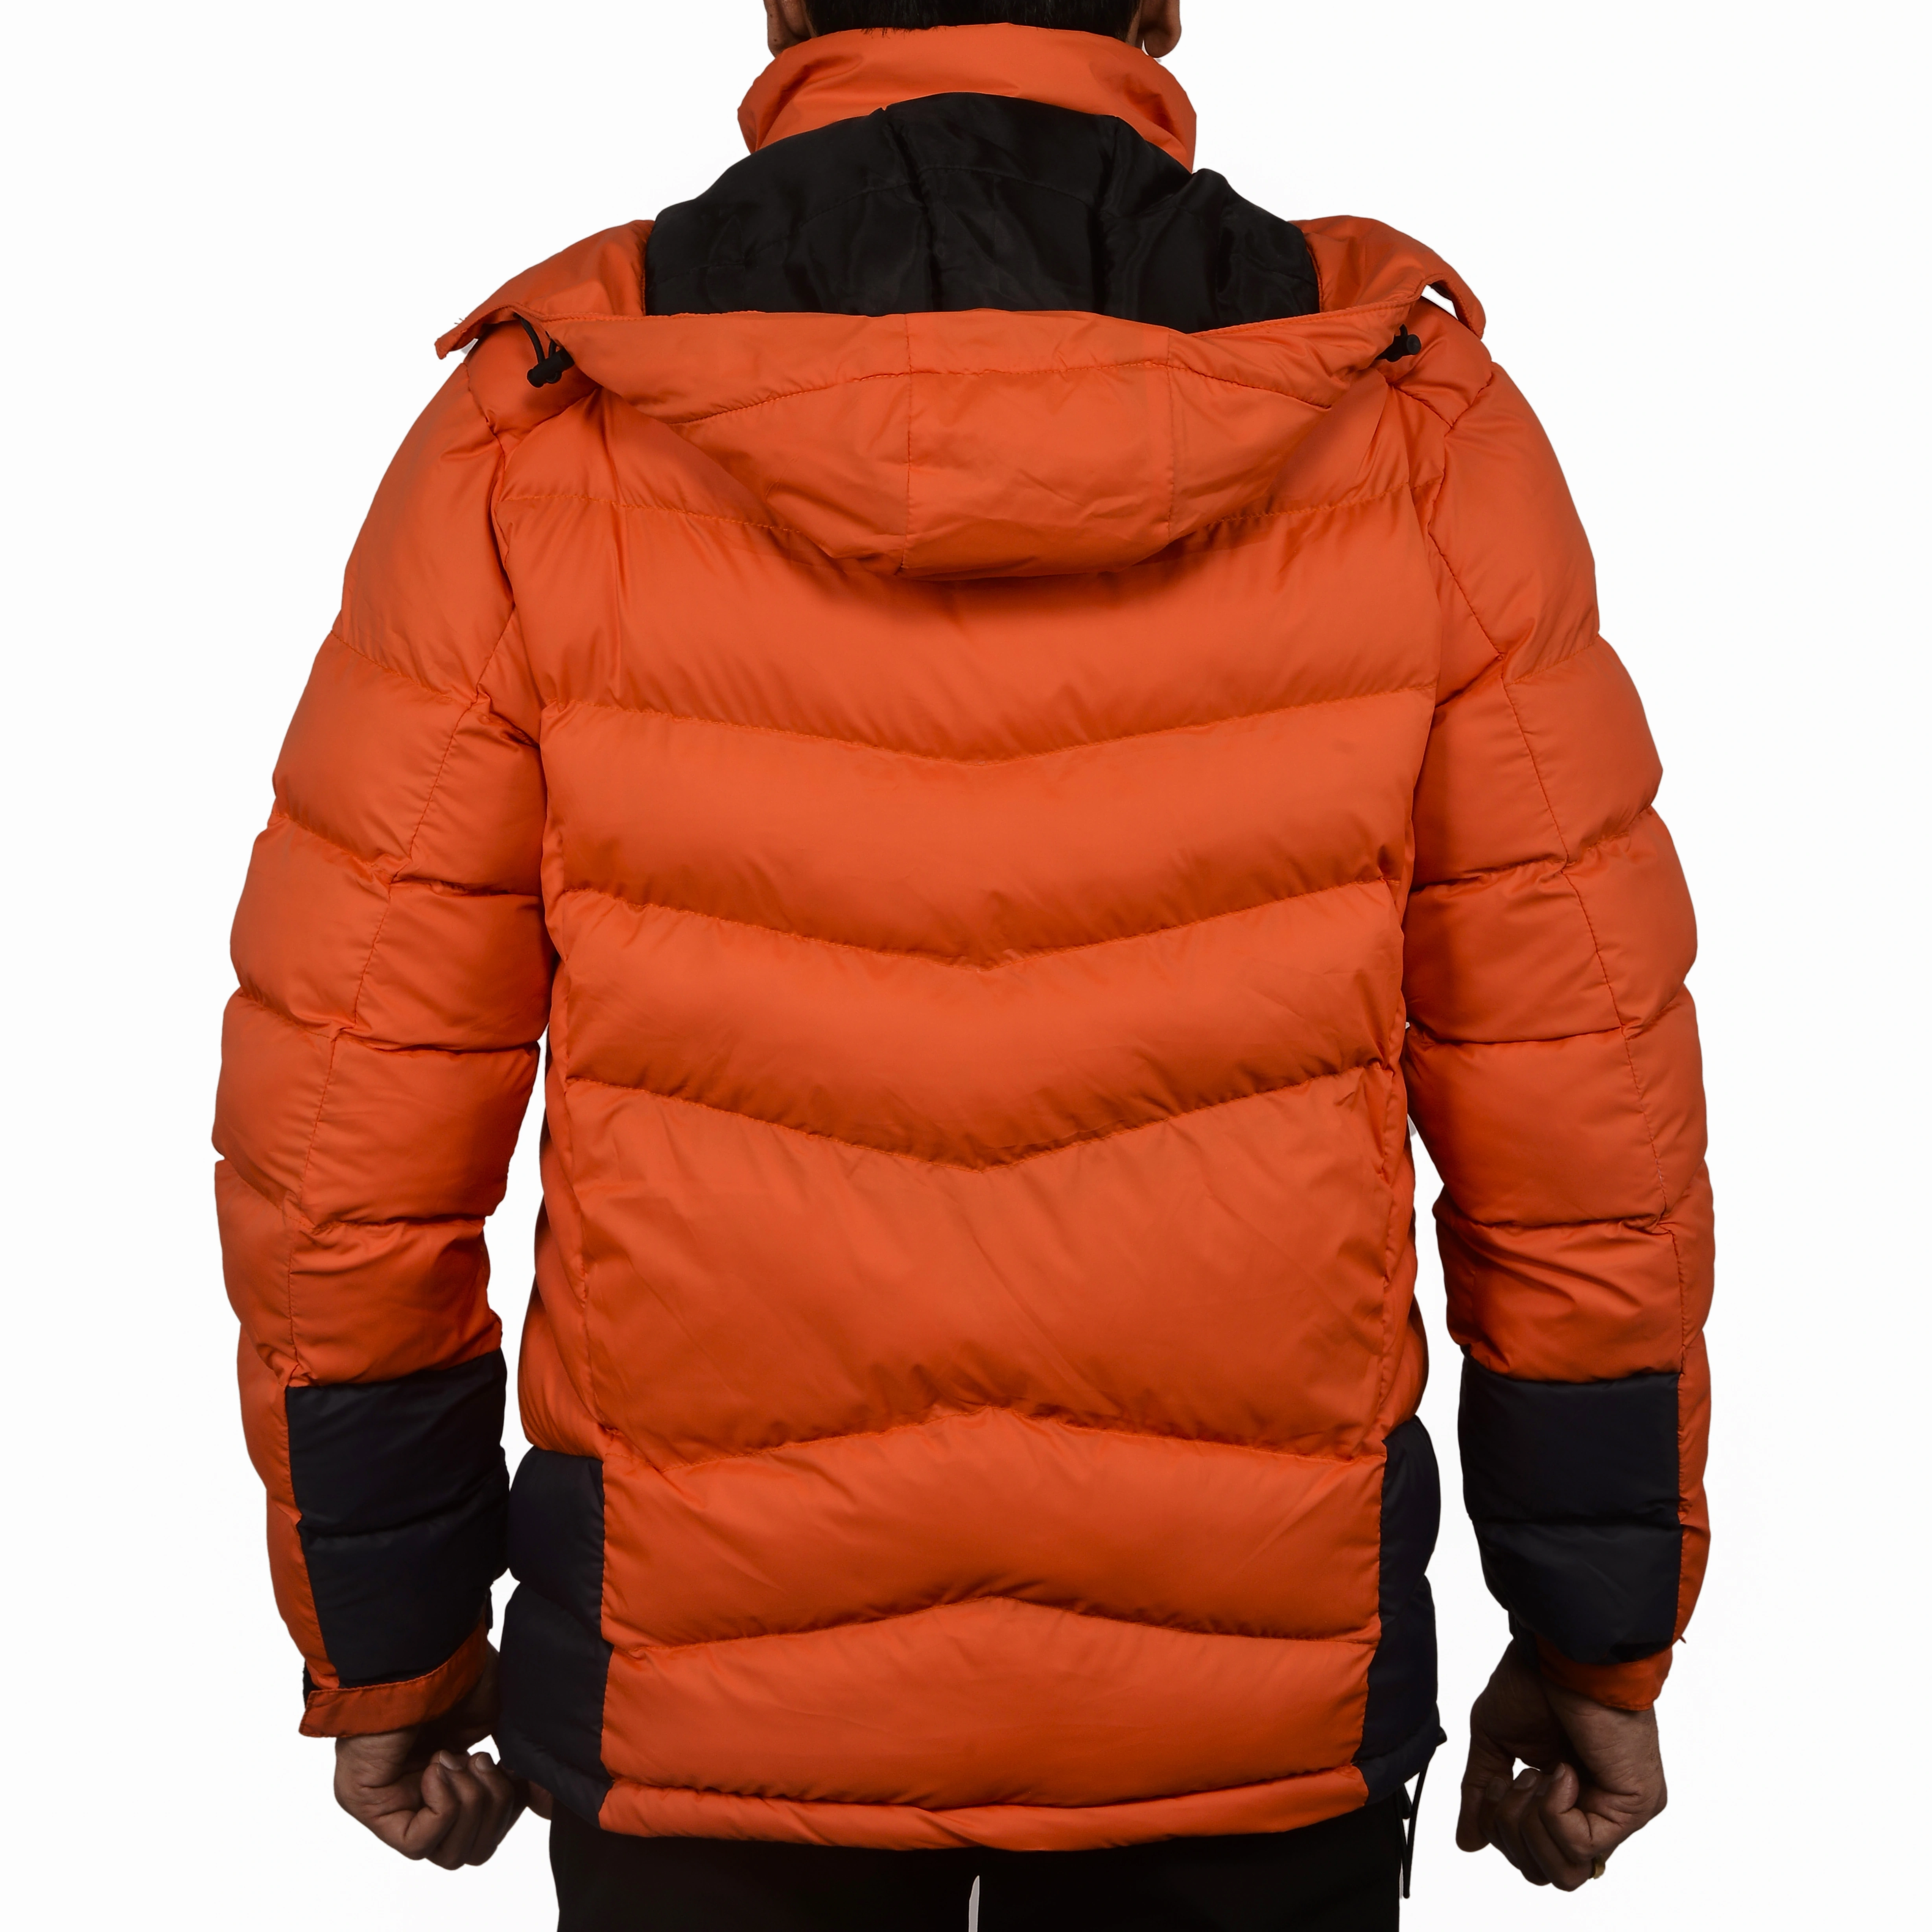 K2 Survivor Down Jacket for Men: Stylized Functionality for Extreme Cold Weather Expeditions (Up to -20°C)-M-Orange-4